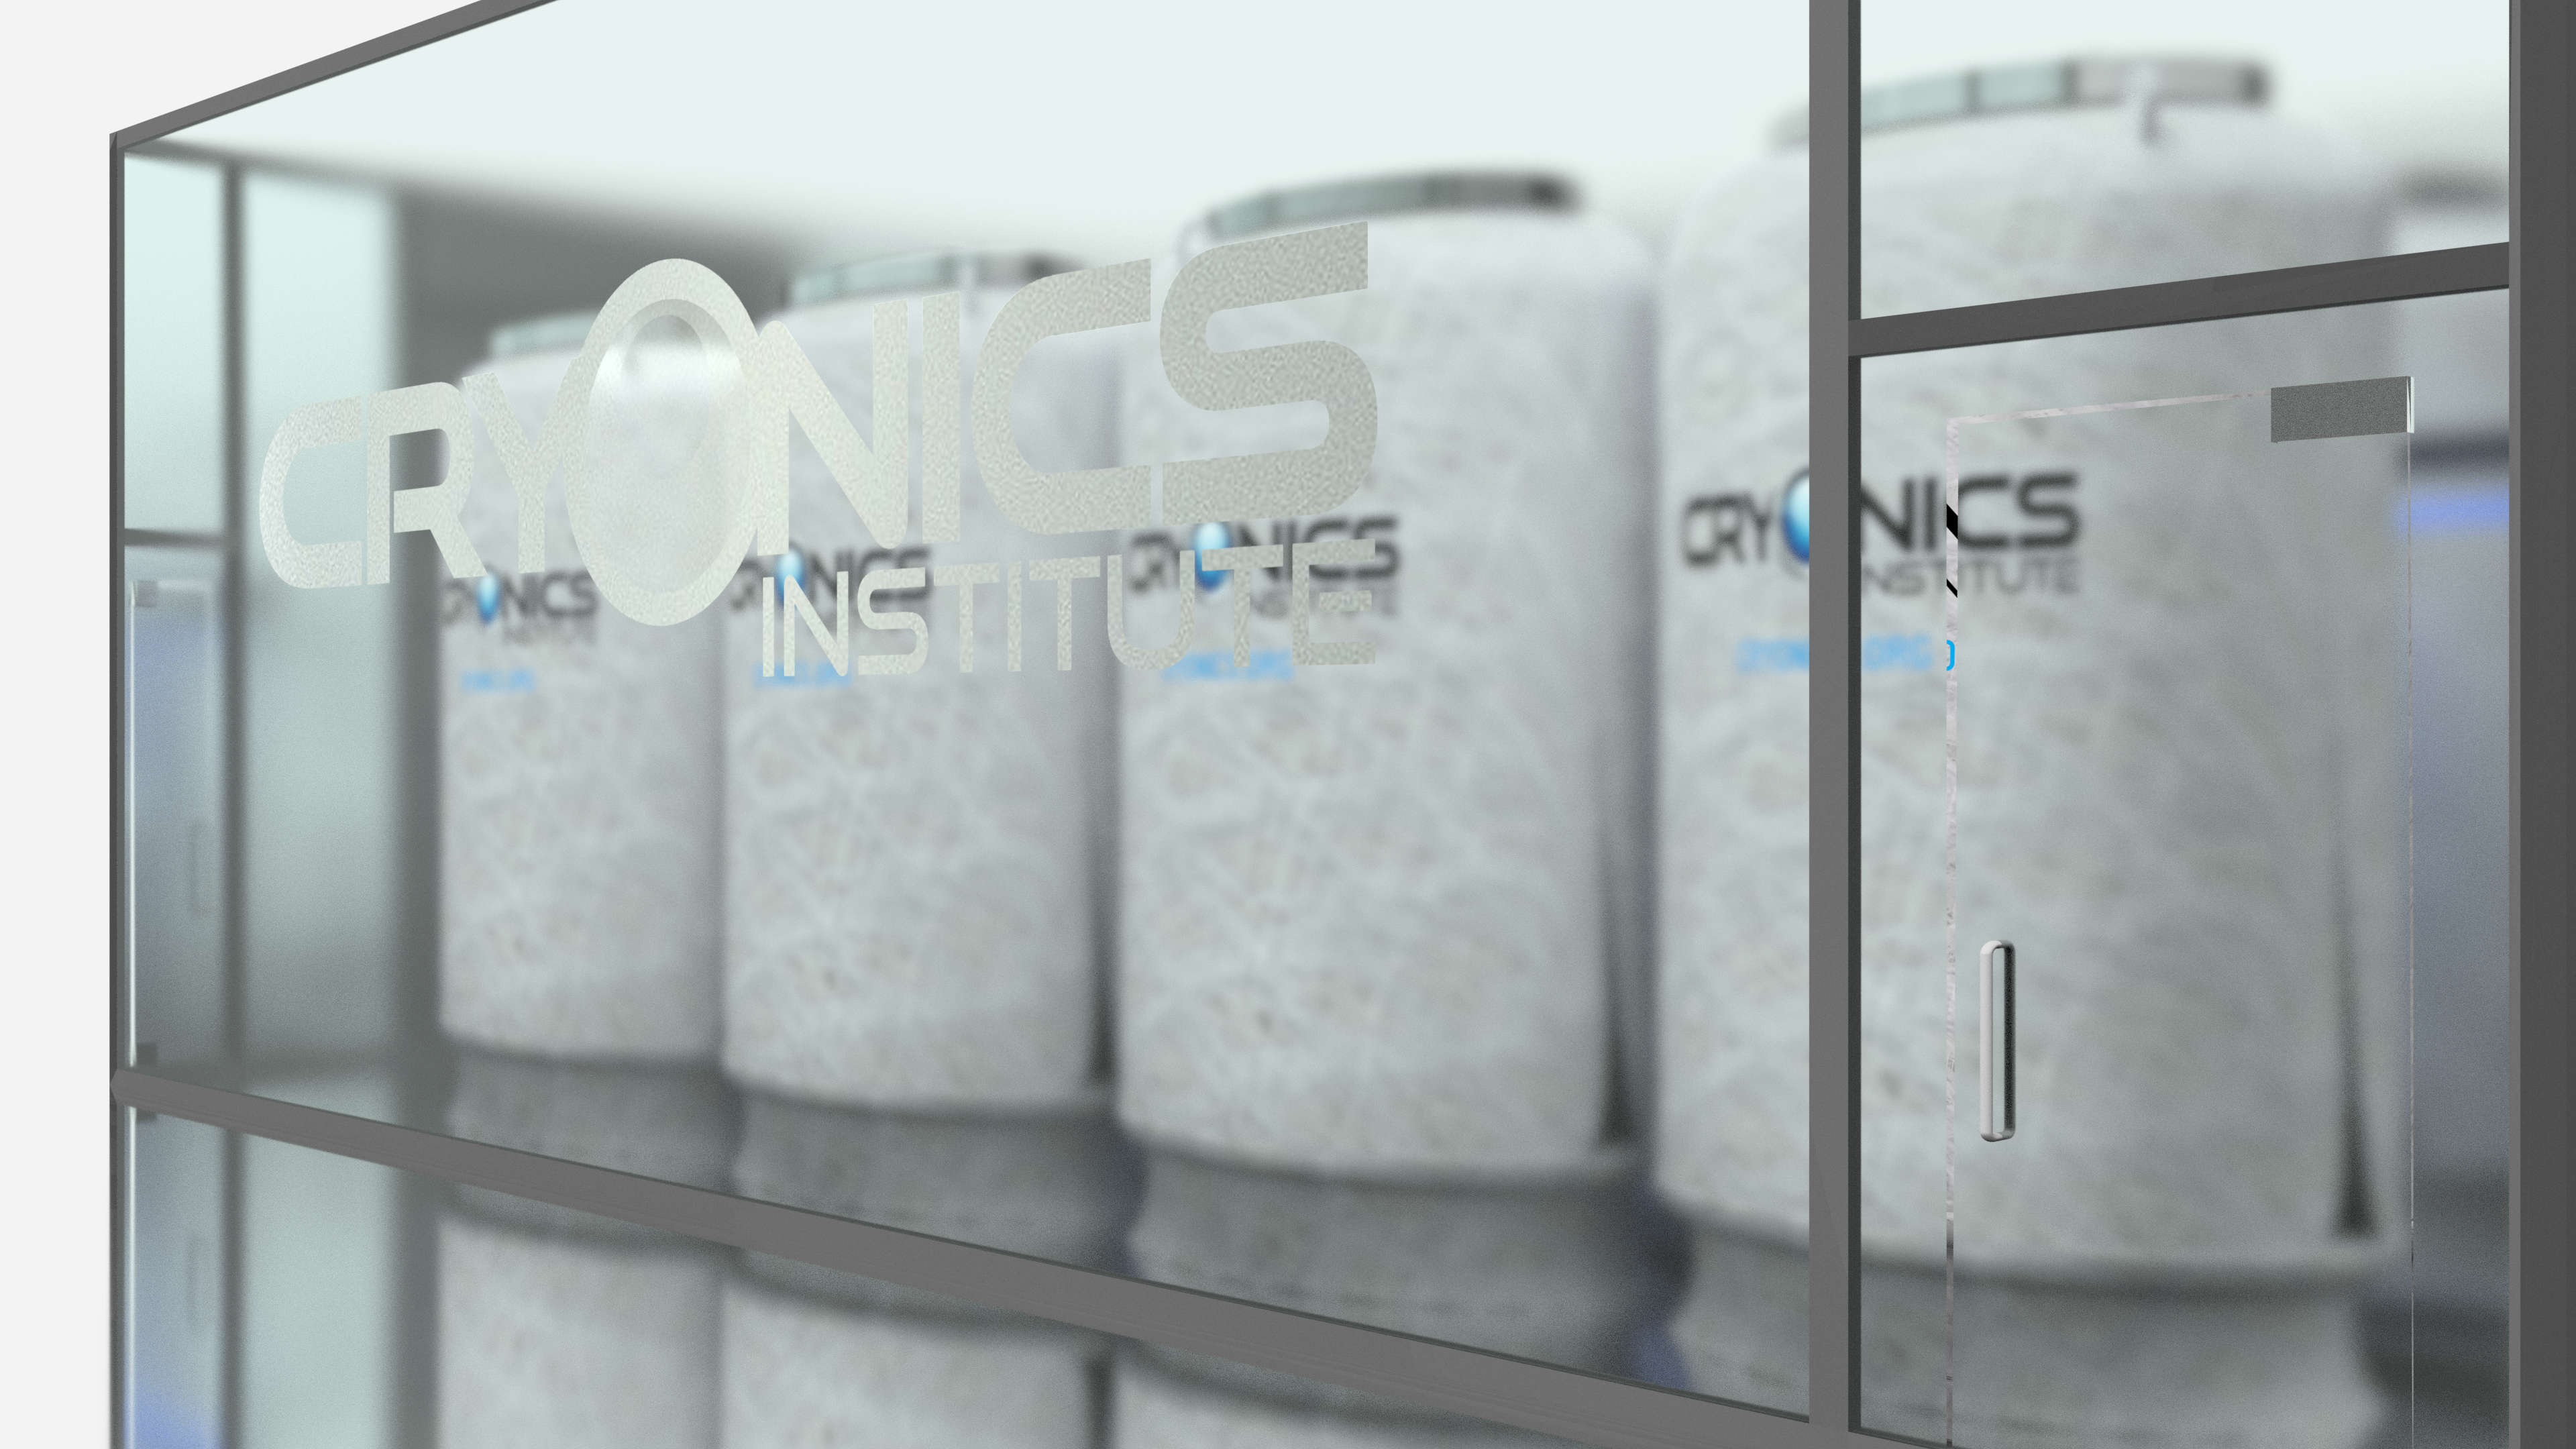 Cryonics Cryonics Institute Technology Science 3840x2160